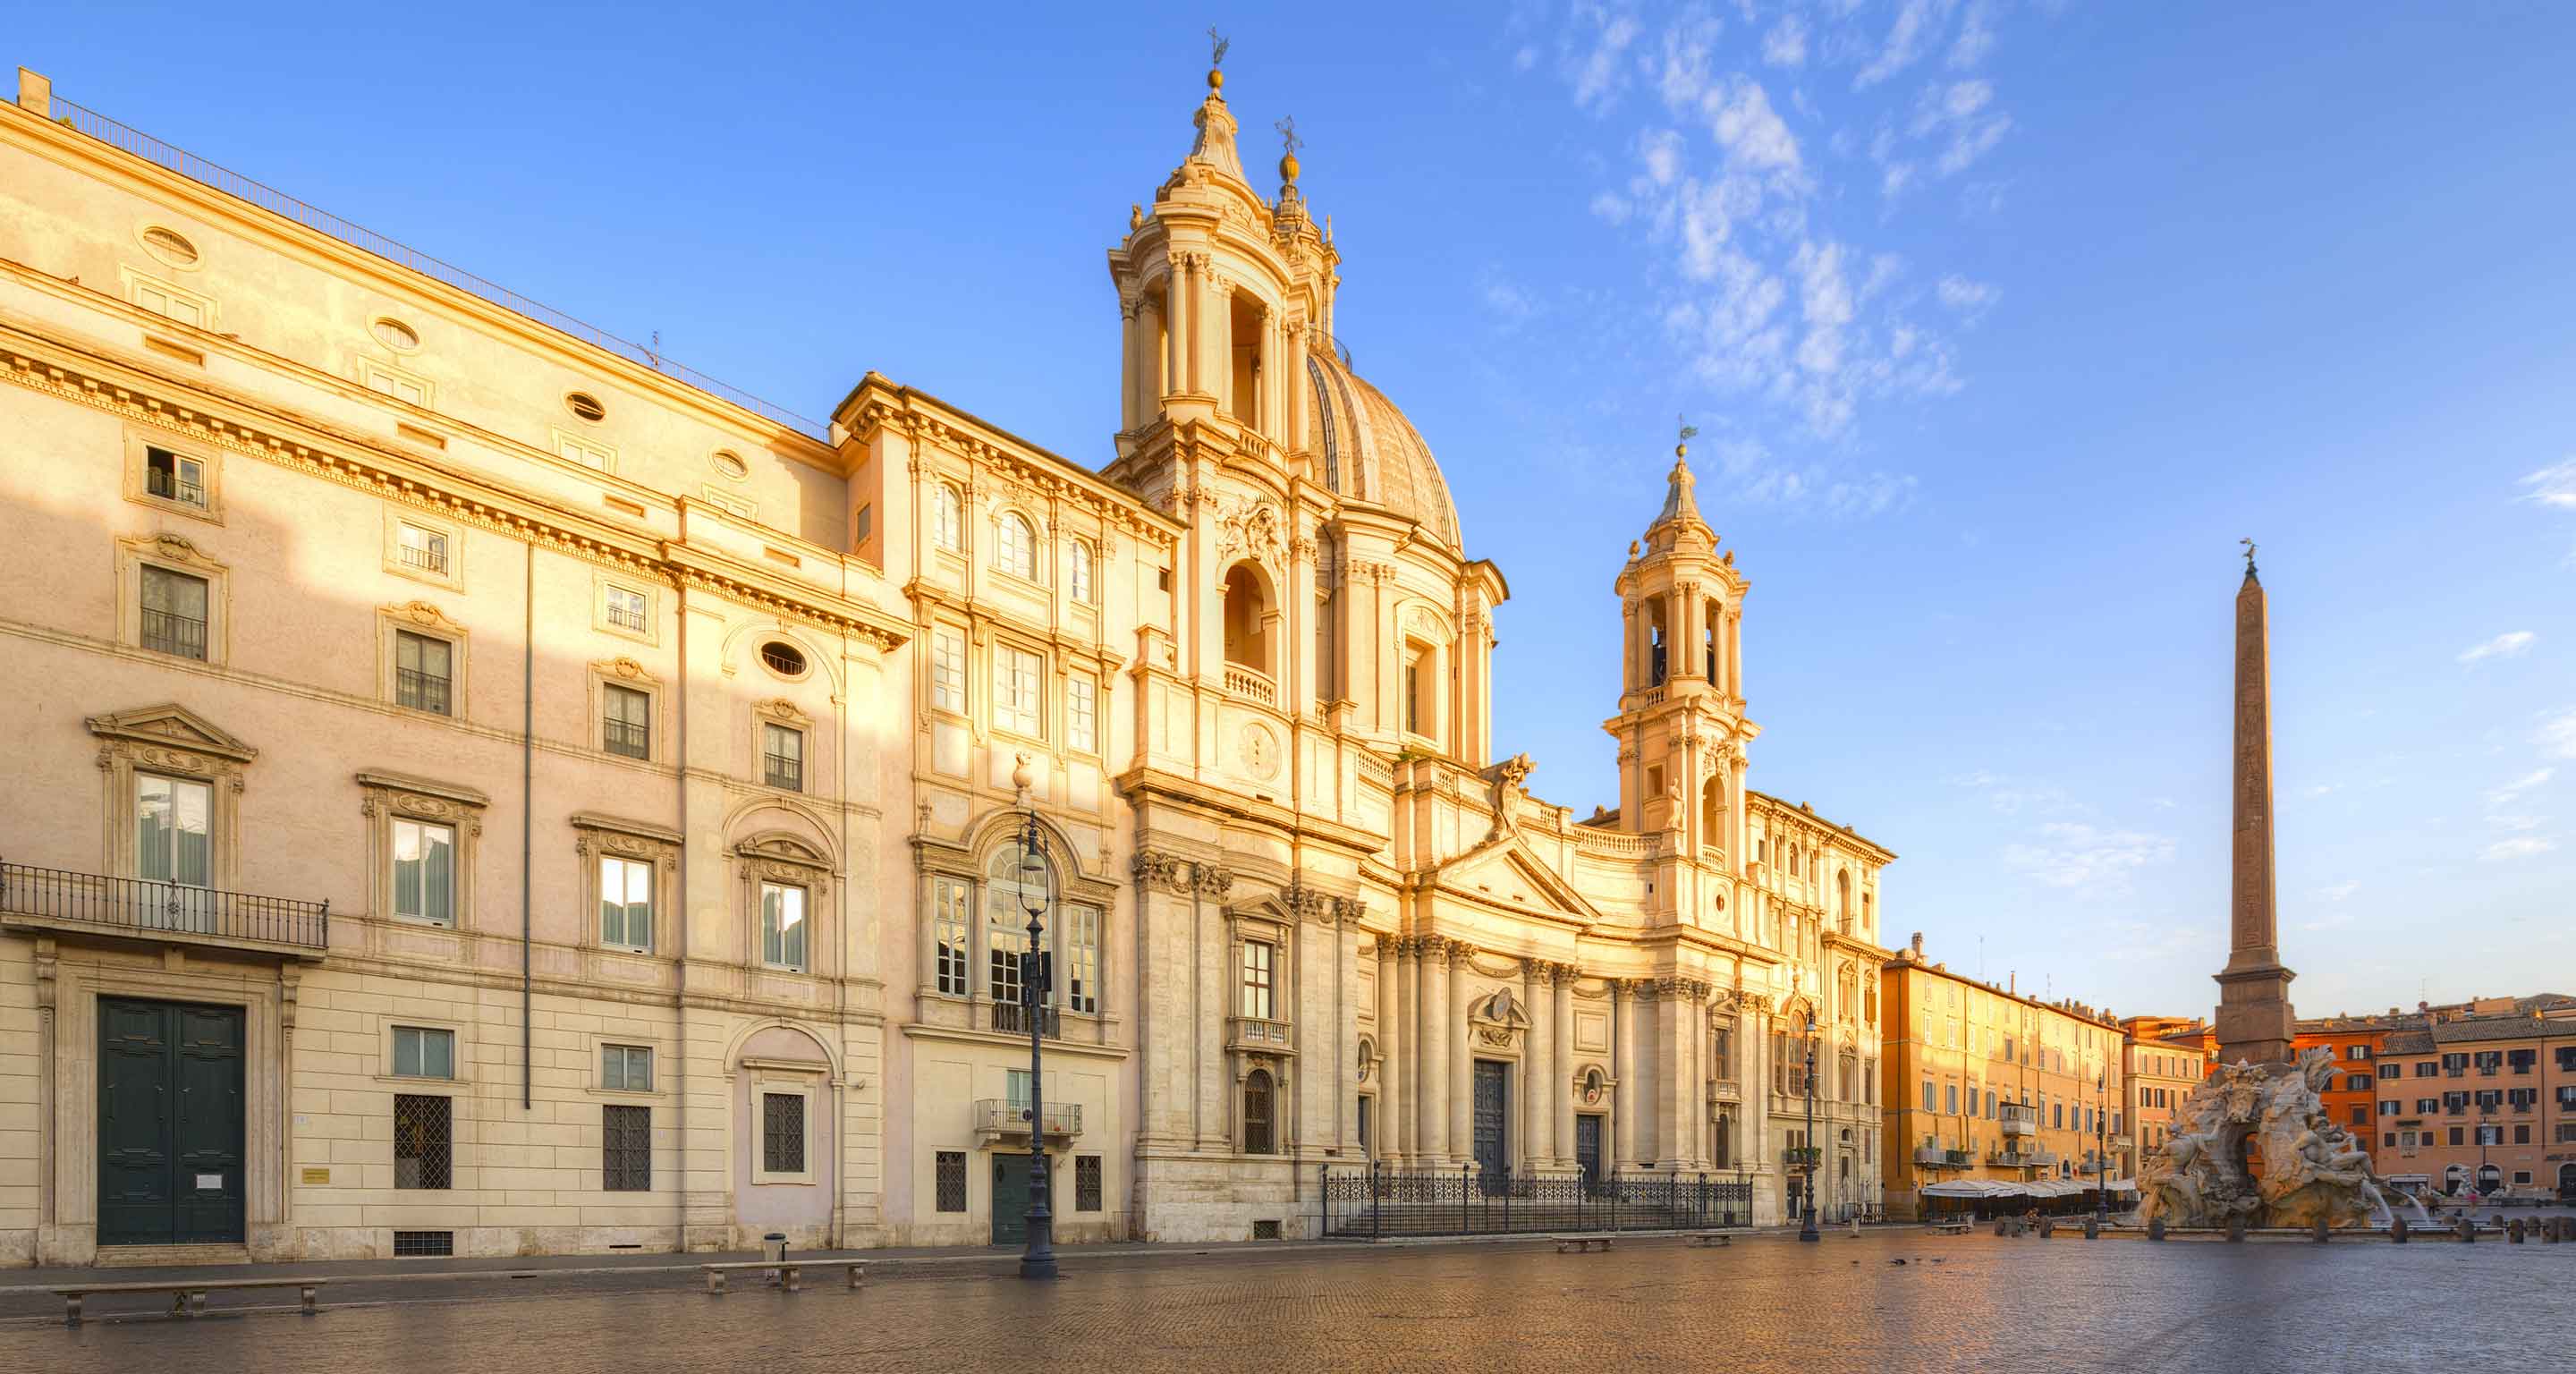 Church of Saint Agnes at Piazza Navona in Rome.